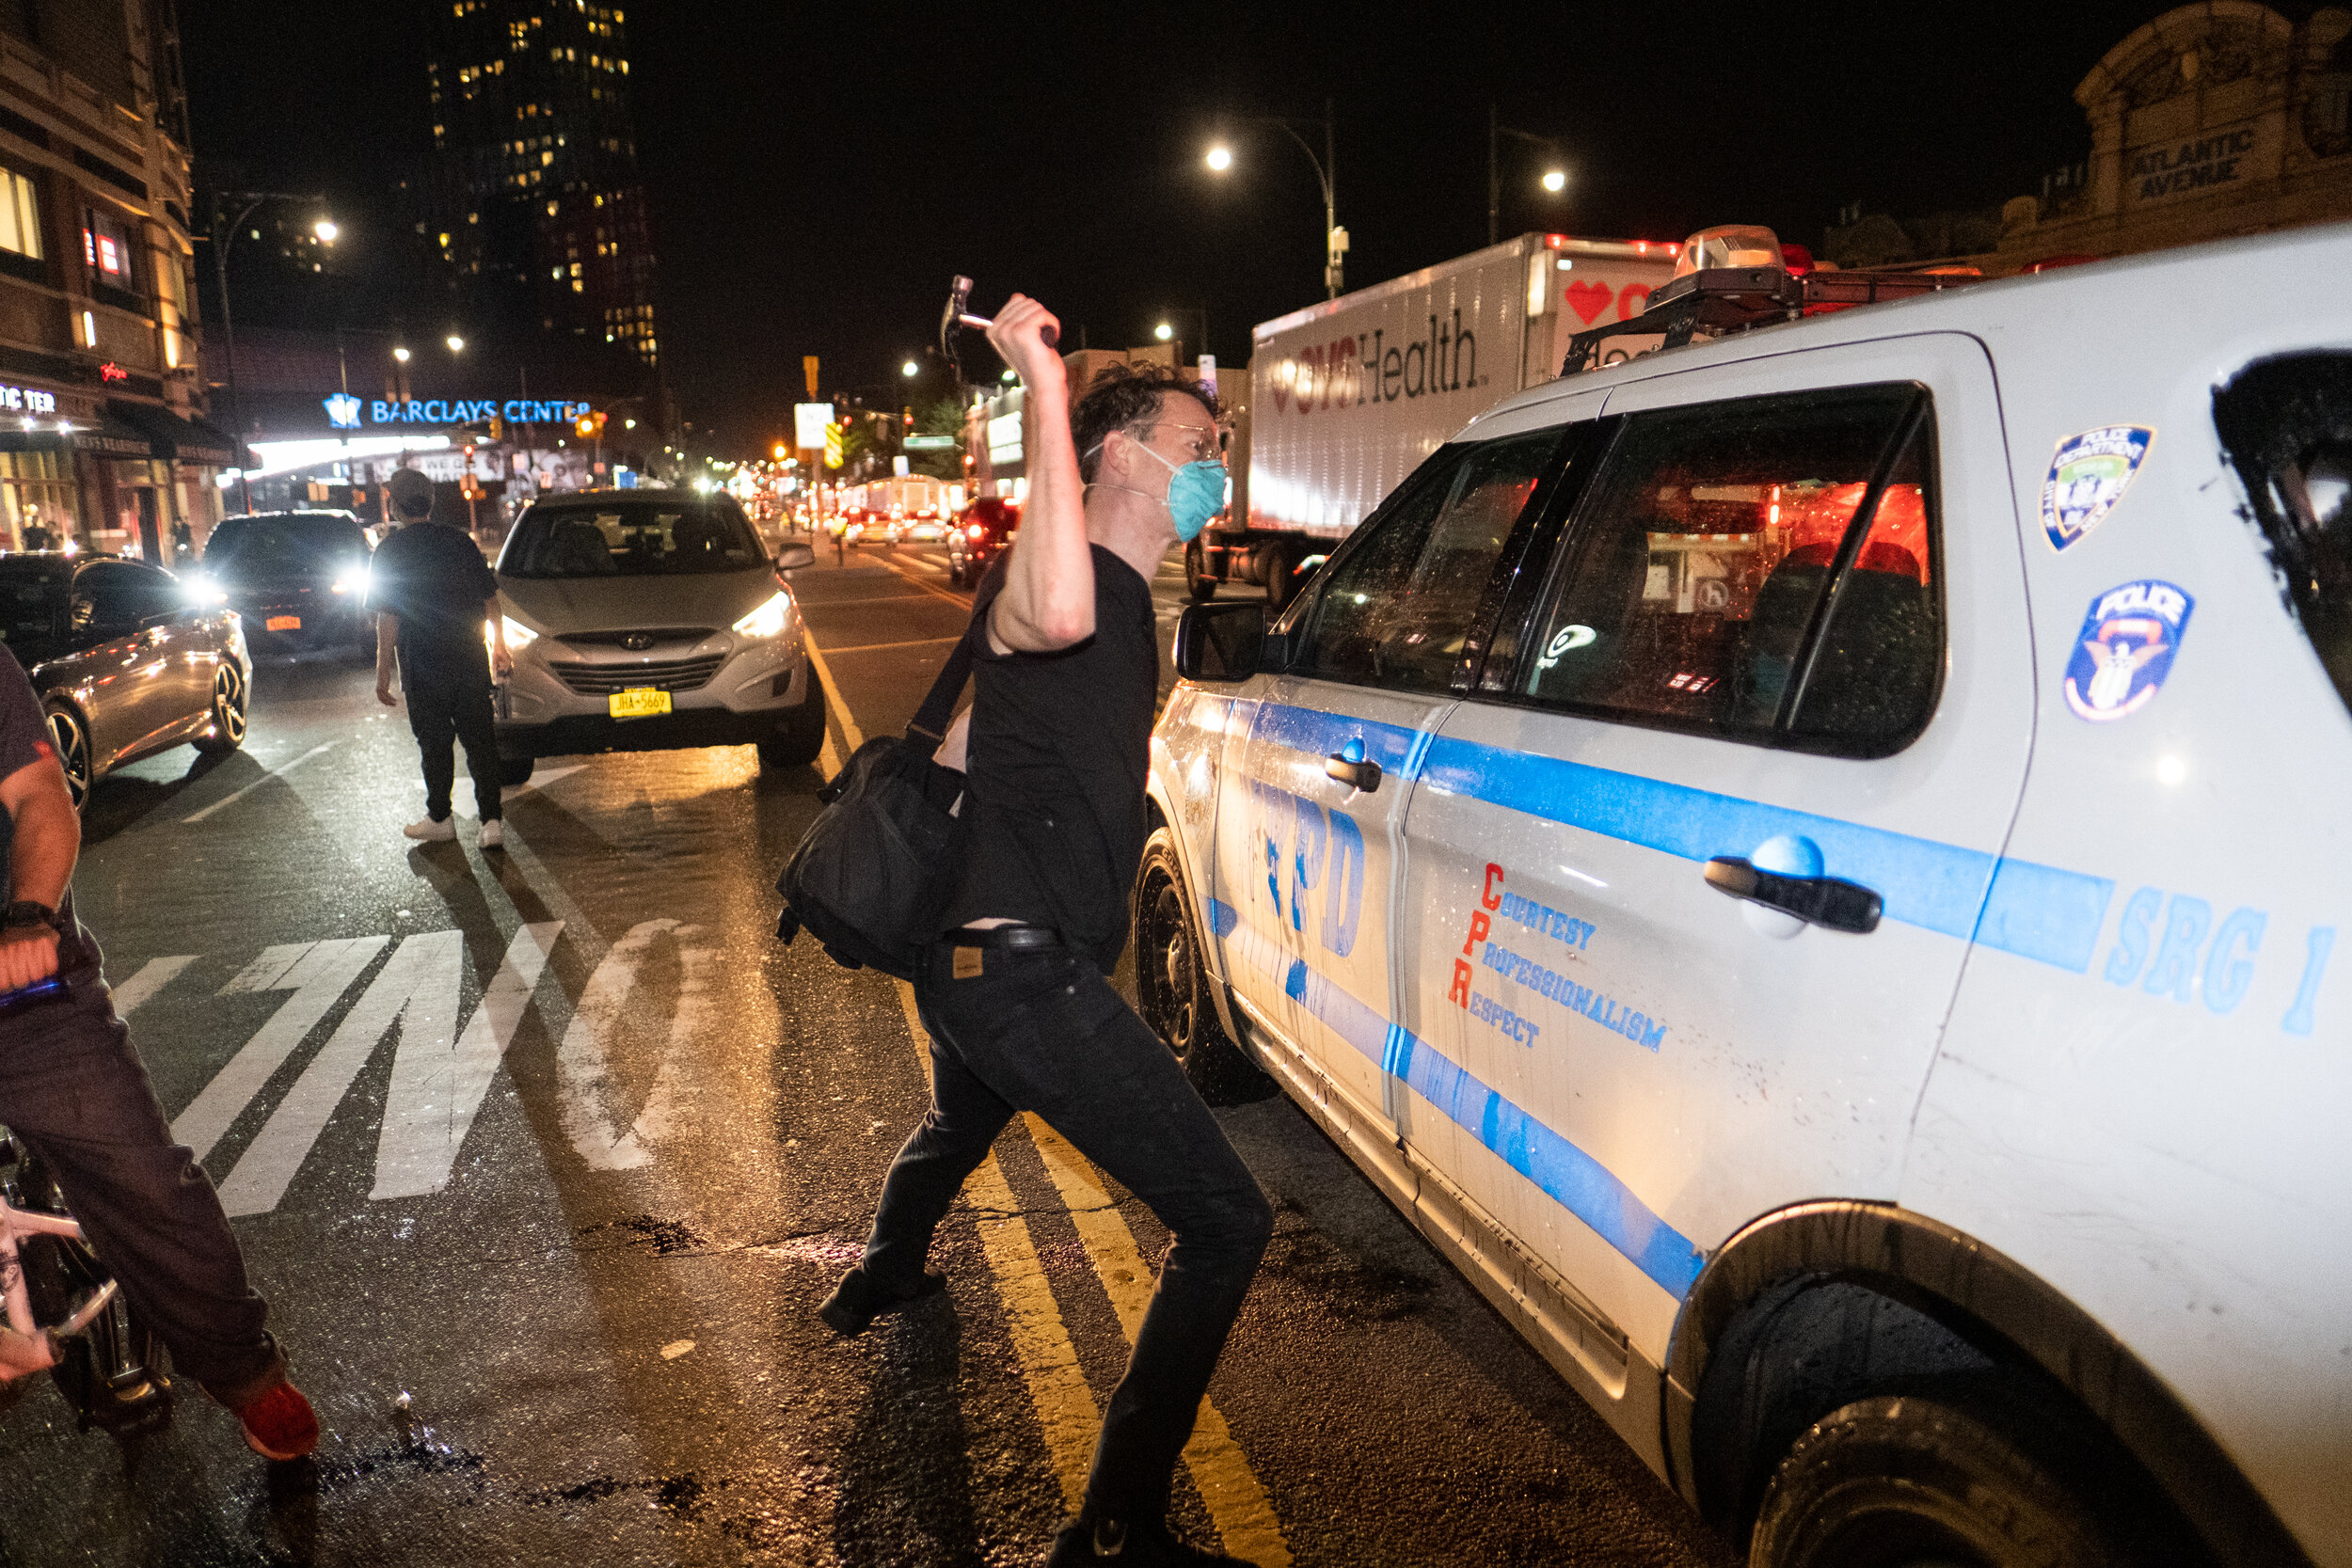  May 29, 2020: New York, NY -   A man smashes the window of a NYPD vehicle as protesters clash with NYPD officers near the Barclay’s Center after George Floyd was killed while being detained by Minneapolis police on May 25.  